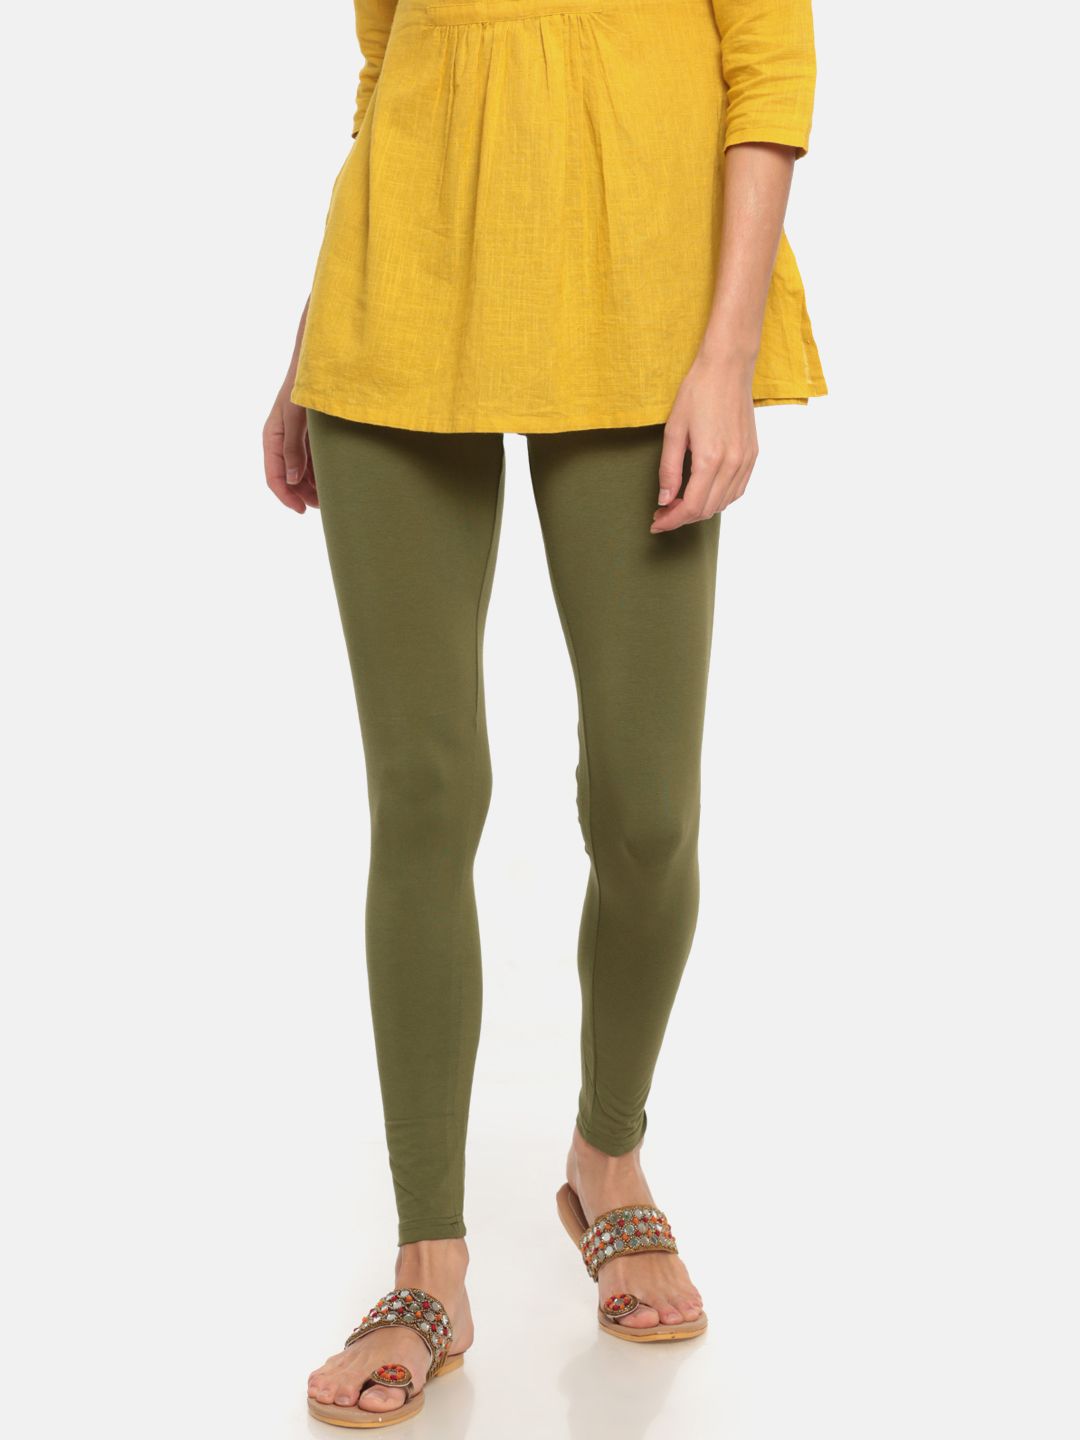 Go Colors Women Olive Green Solid Ankle-Length Leggings Price in India